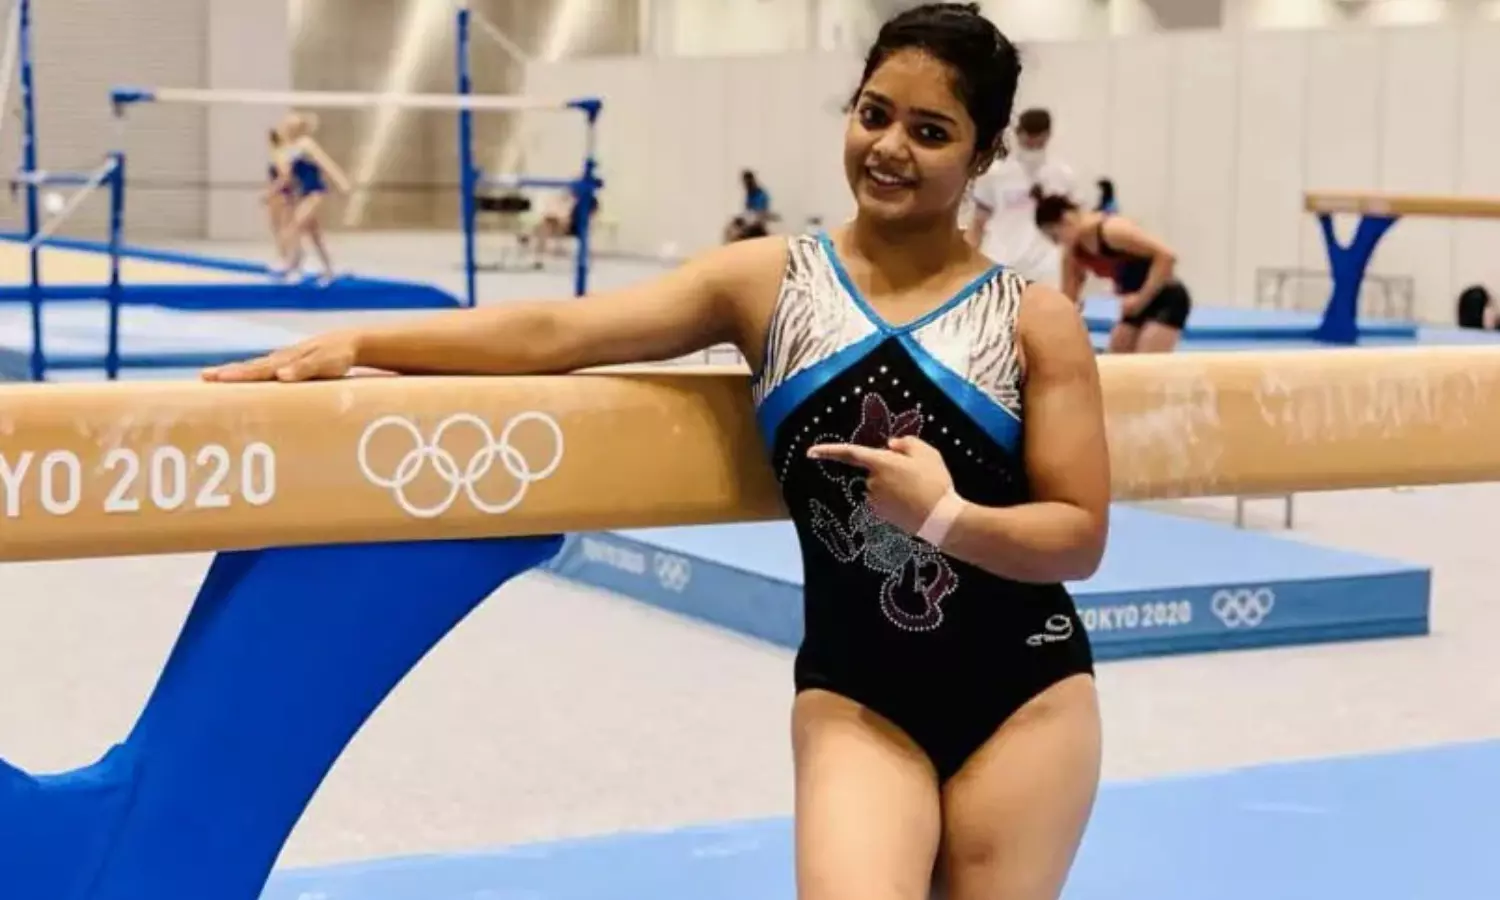 Tokyo Olympics: Pranati Nayak ends her Gymnastics campaign with a commendable performance